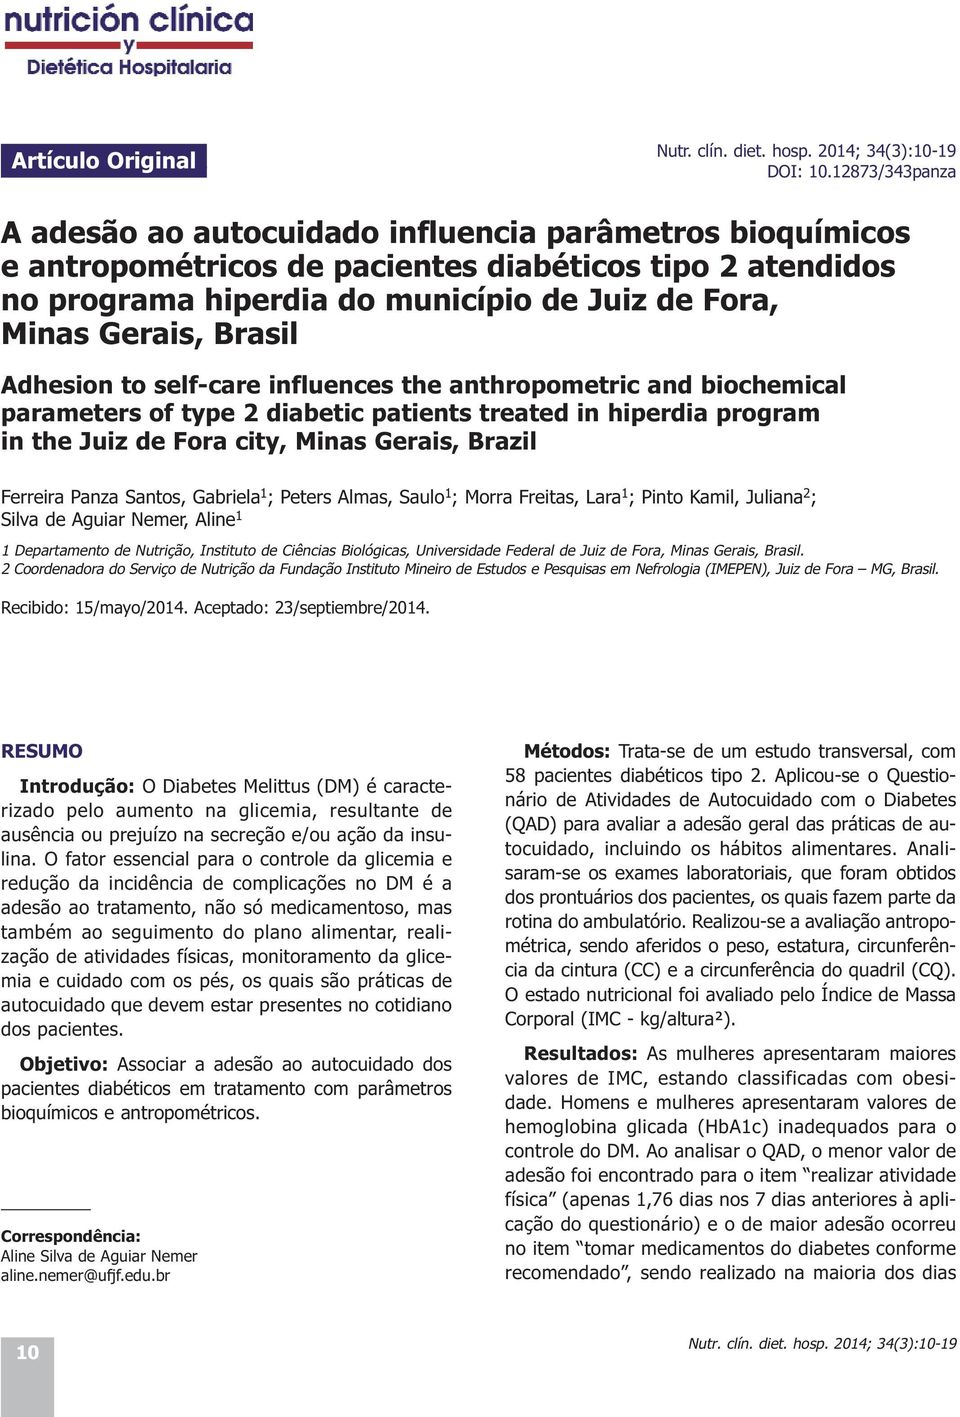 Brasil Adhesion to self-care influences the anthropometric and biochemical parameters of type 2 diabetic patients treated in hiperdia program in the Juiz de Fora city, Minas Gerais, Brazil Ferreira